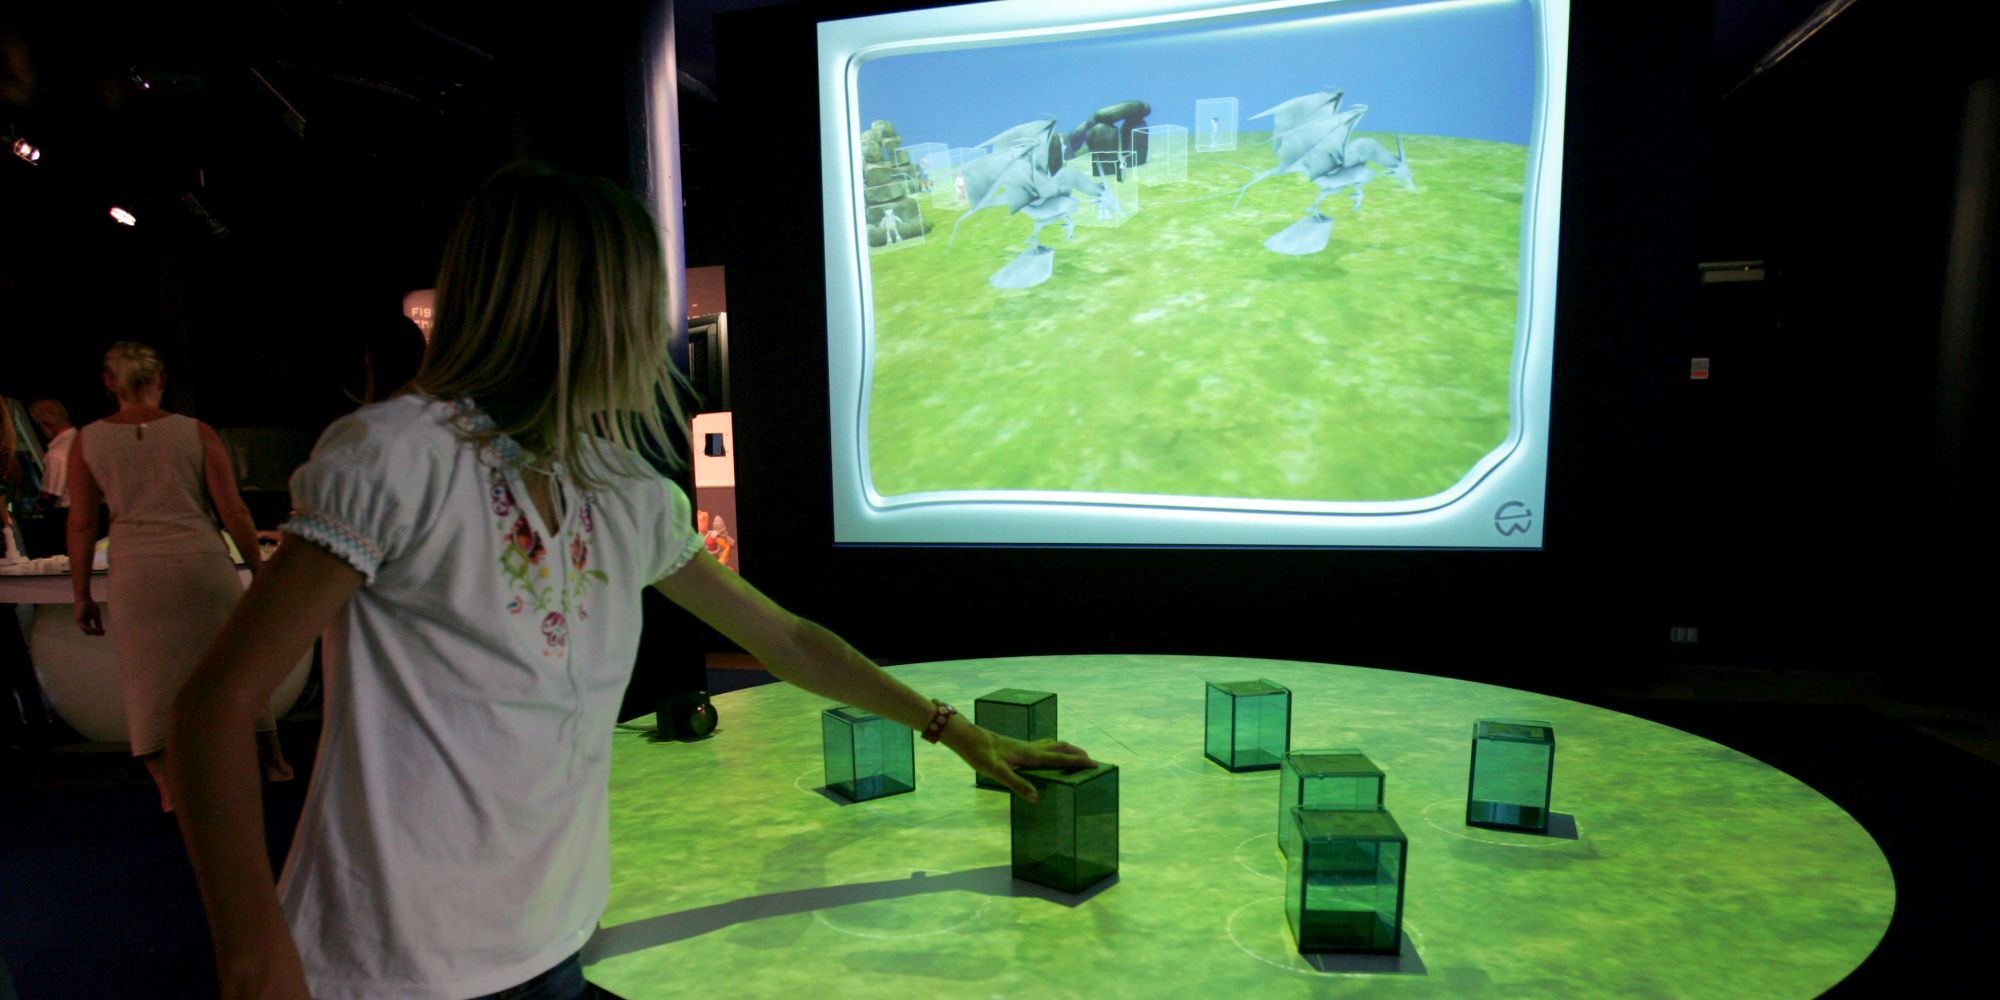 Gulliver's World at the Ars Electronica Center